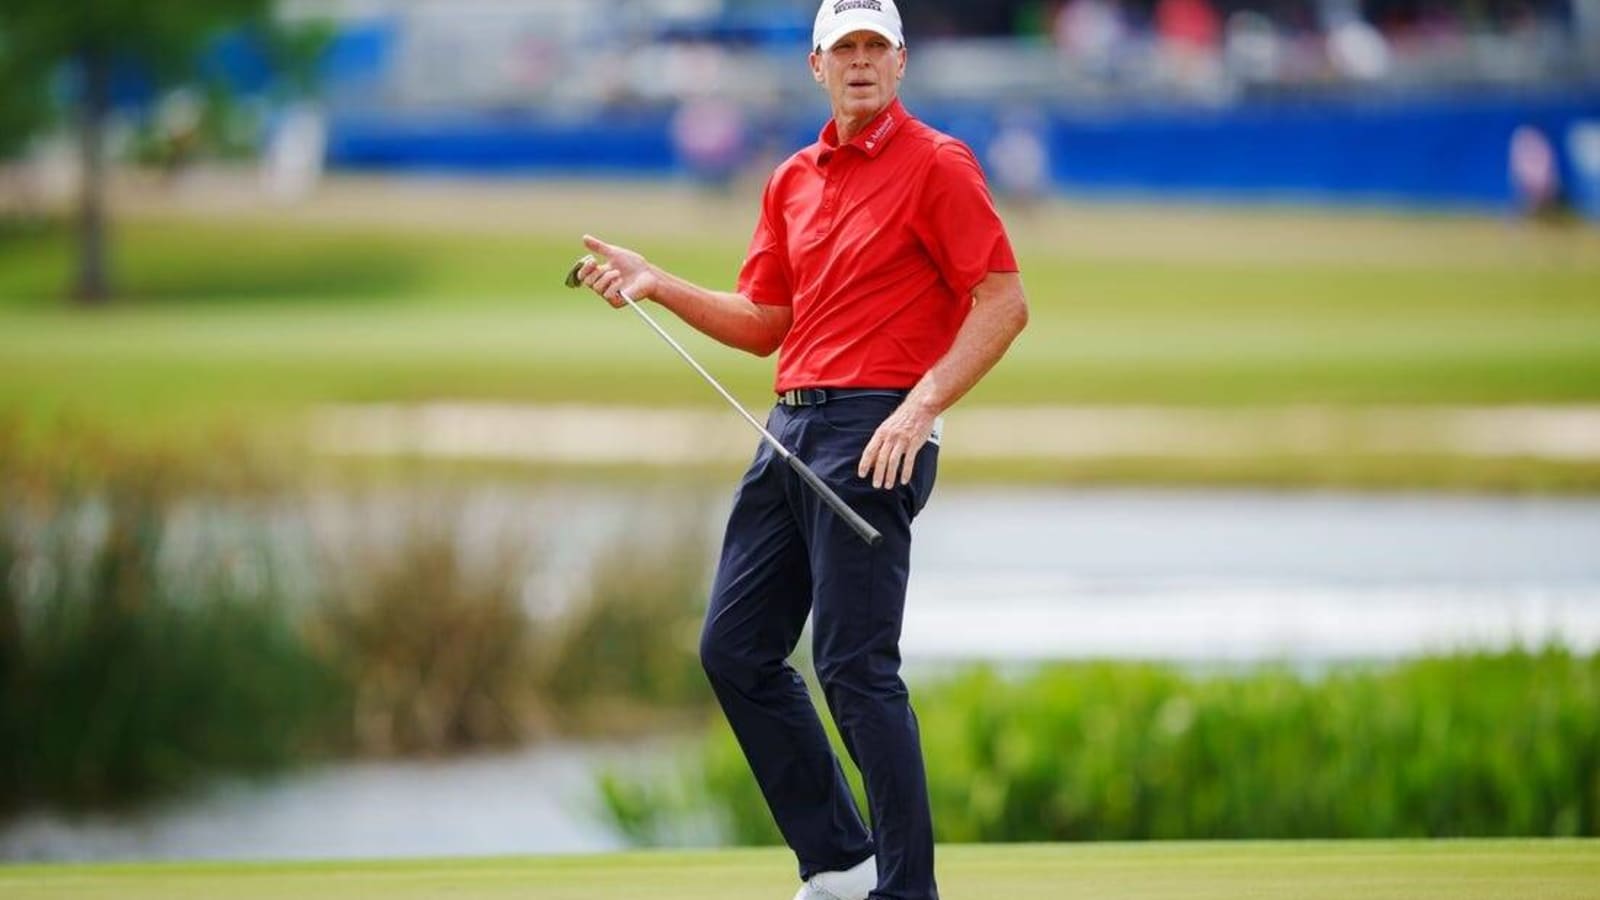 Steve Stricker still sizzling as leader at Principal Charity Classic